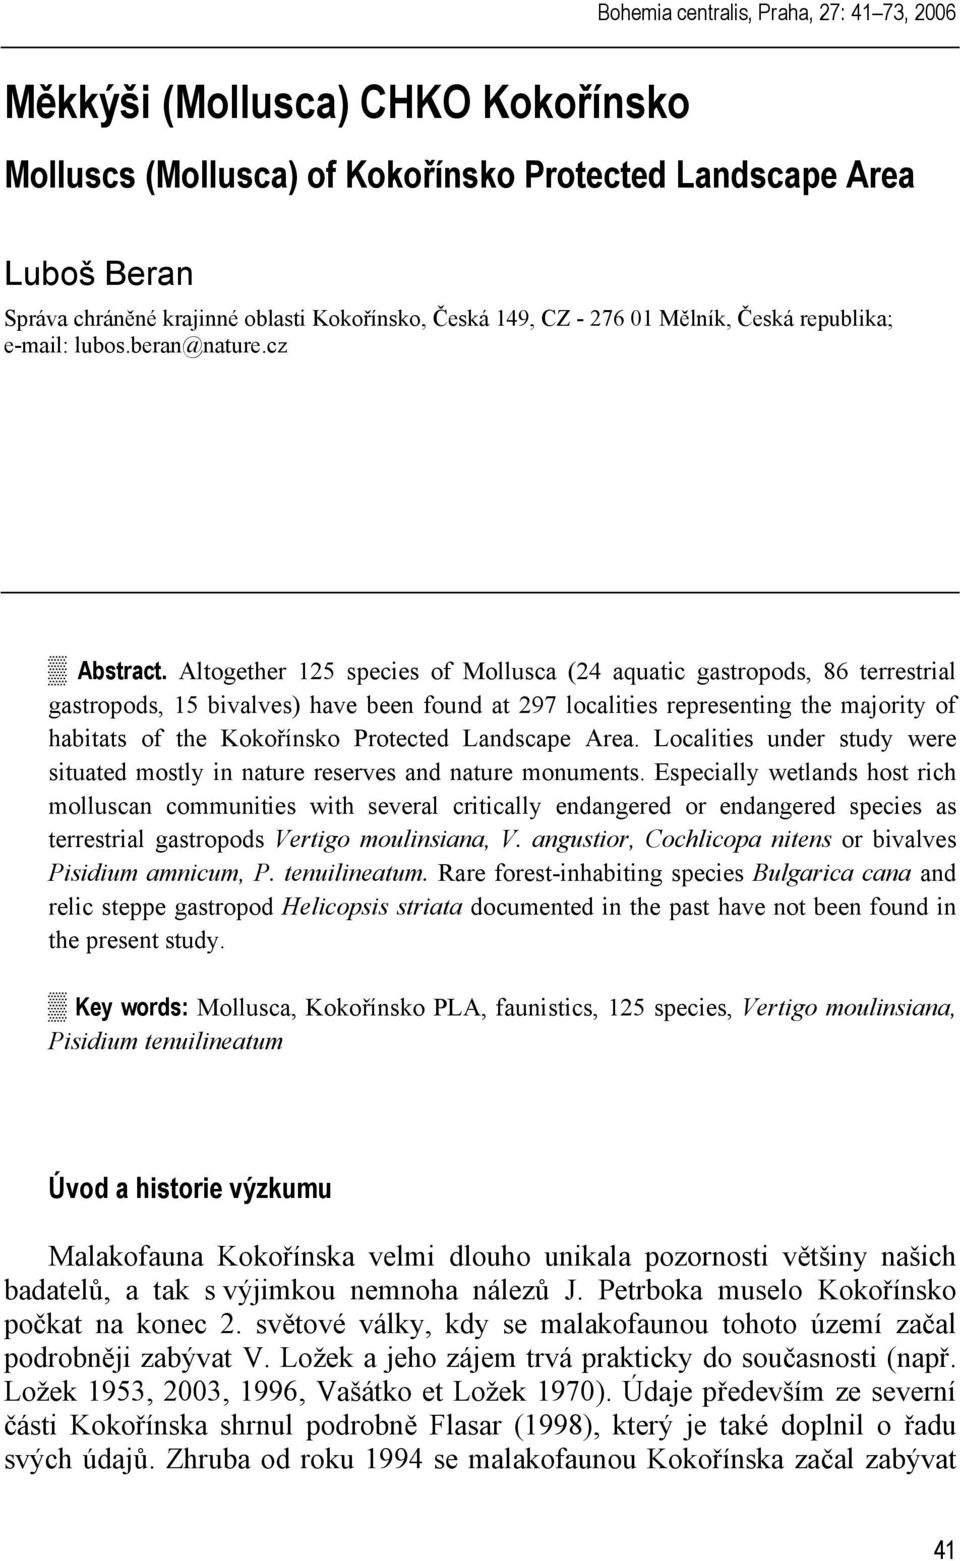 Altogether 125 species of Mollusca (24 aquatic gastropods, 86 terrestrial gastropods, 15 bivalves) have been found at 297 localities representing the majority of habitats of the Kokořínsko Protected